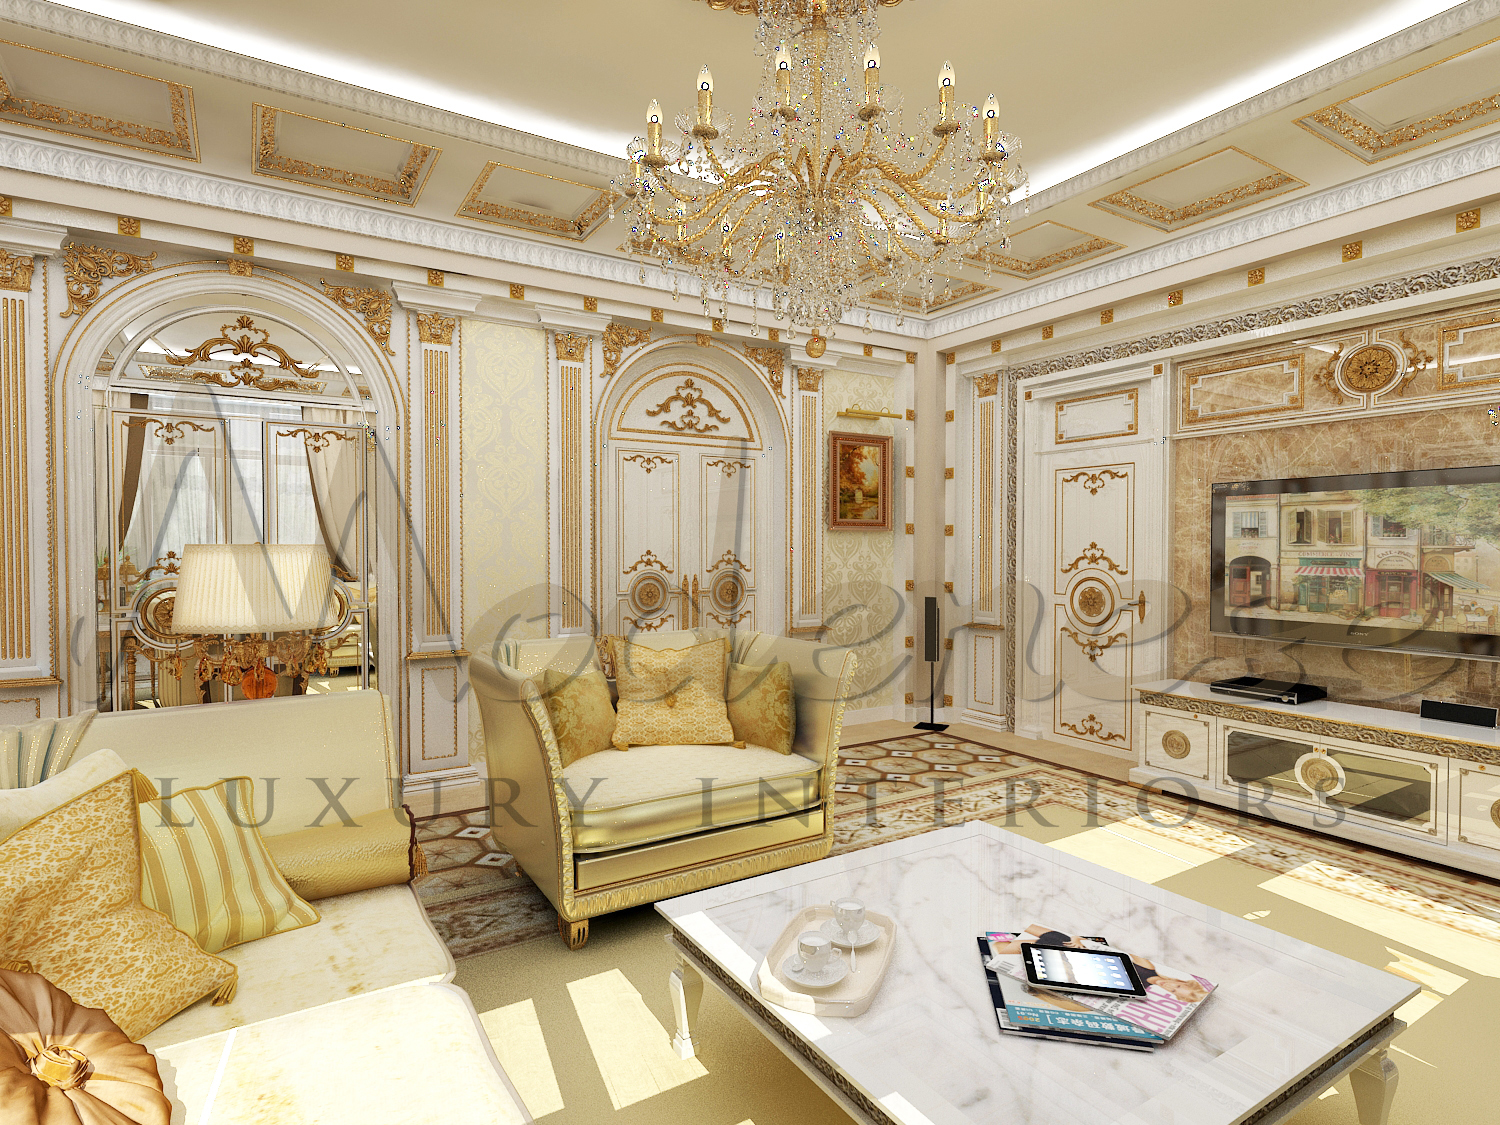 Bespoke refined interior design, high-end materials and best quality furniture for ideal home, luxury interiors for timeless refined houses, top interior design comapany in Pakistan.